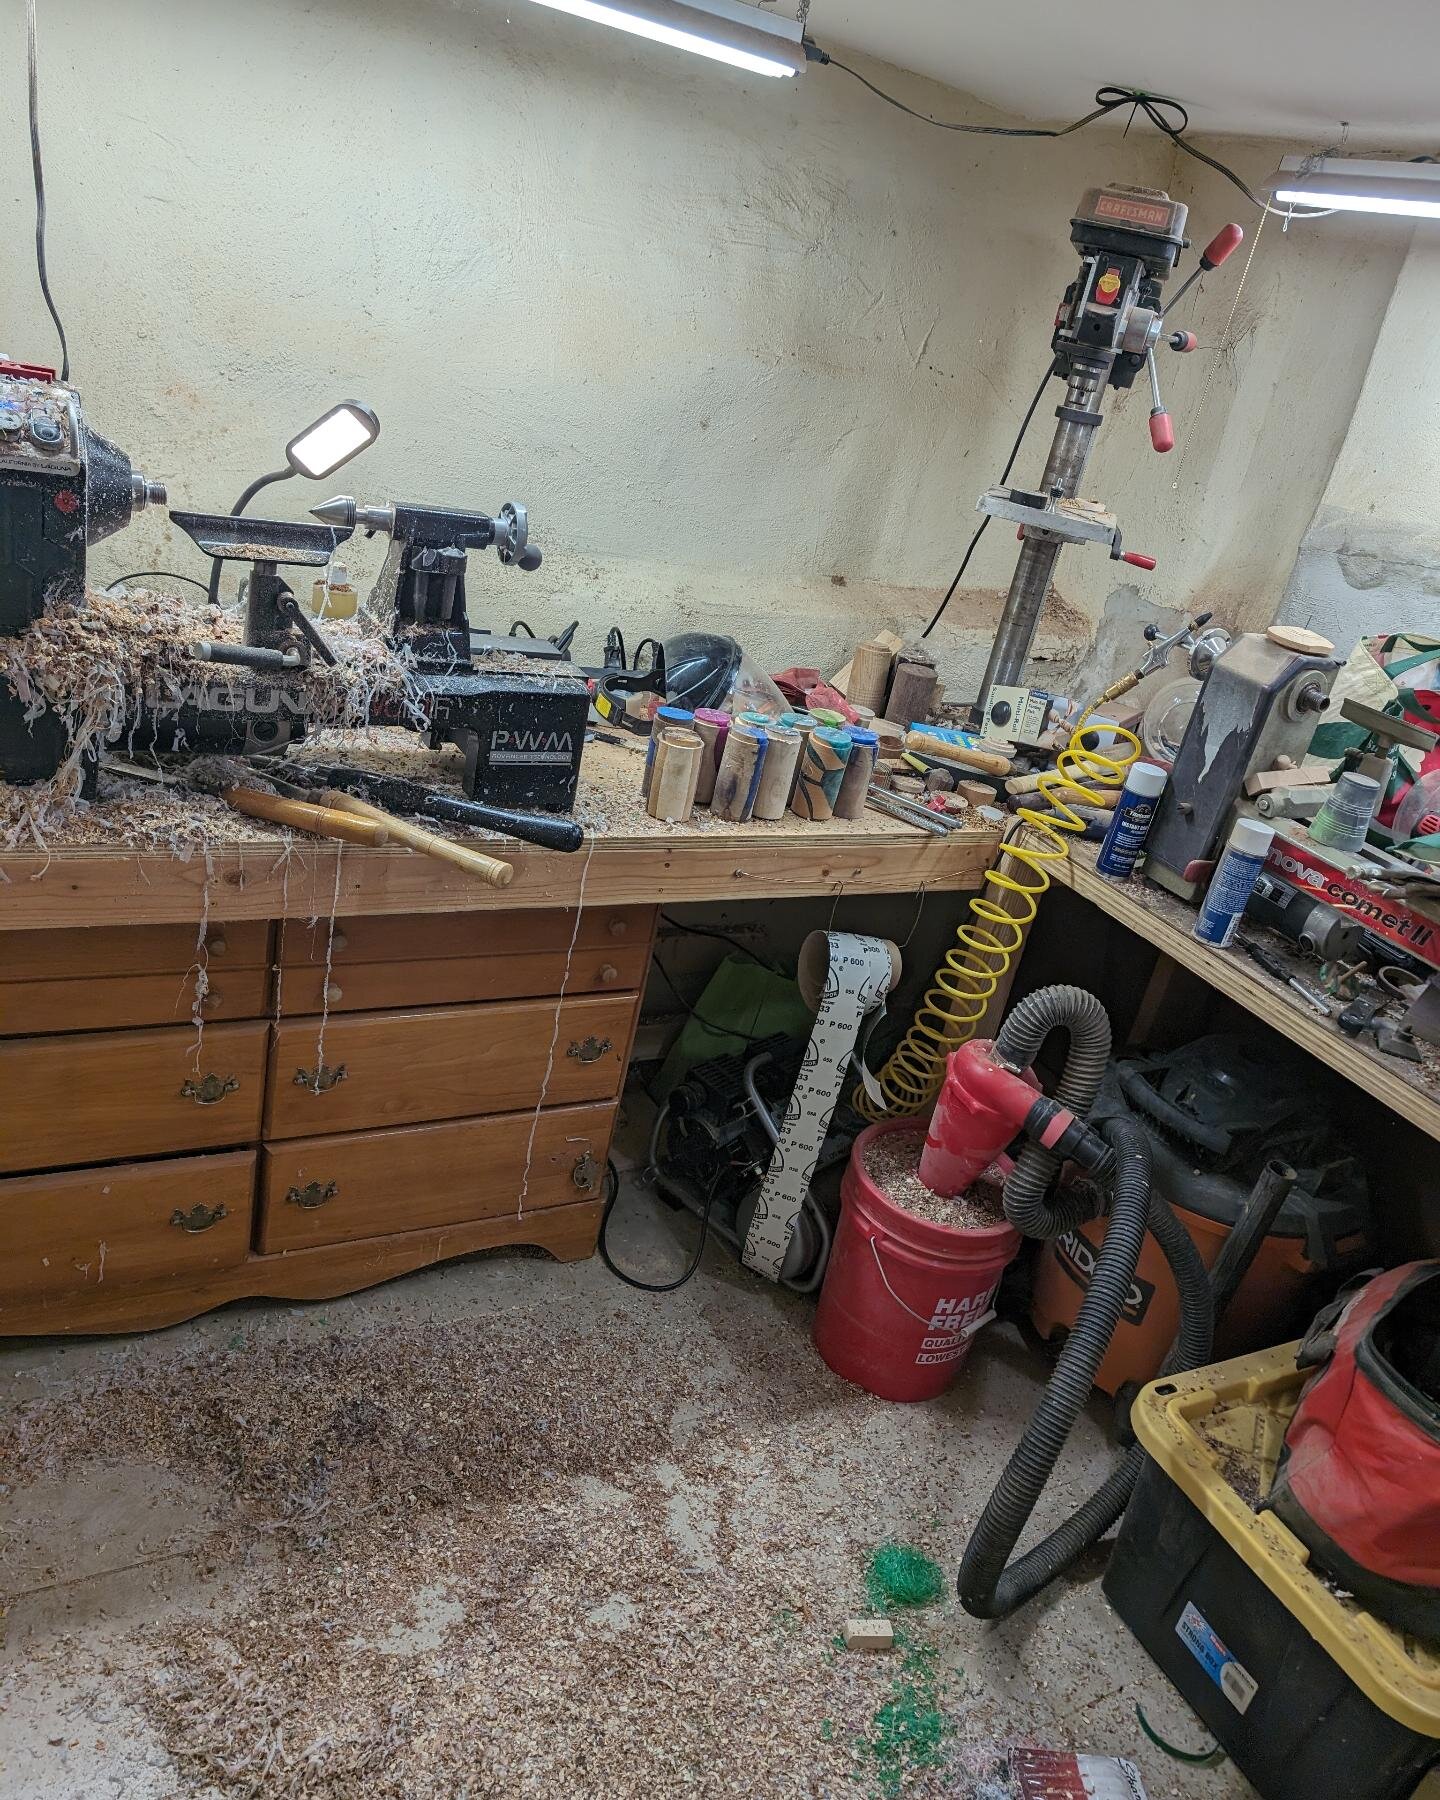 Snow day from work, but that just means more time in the shop.